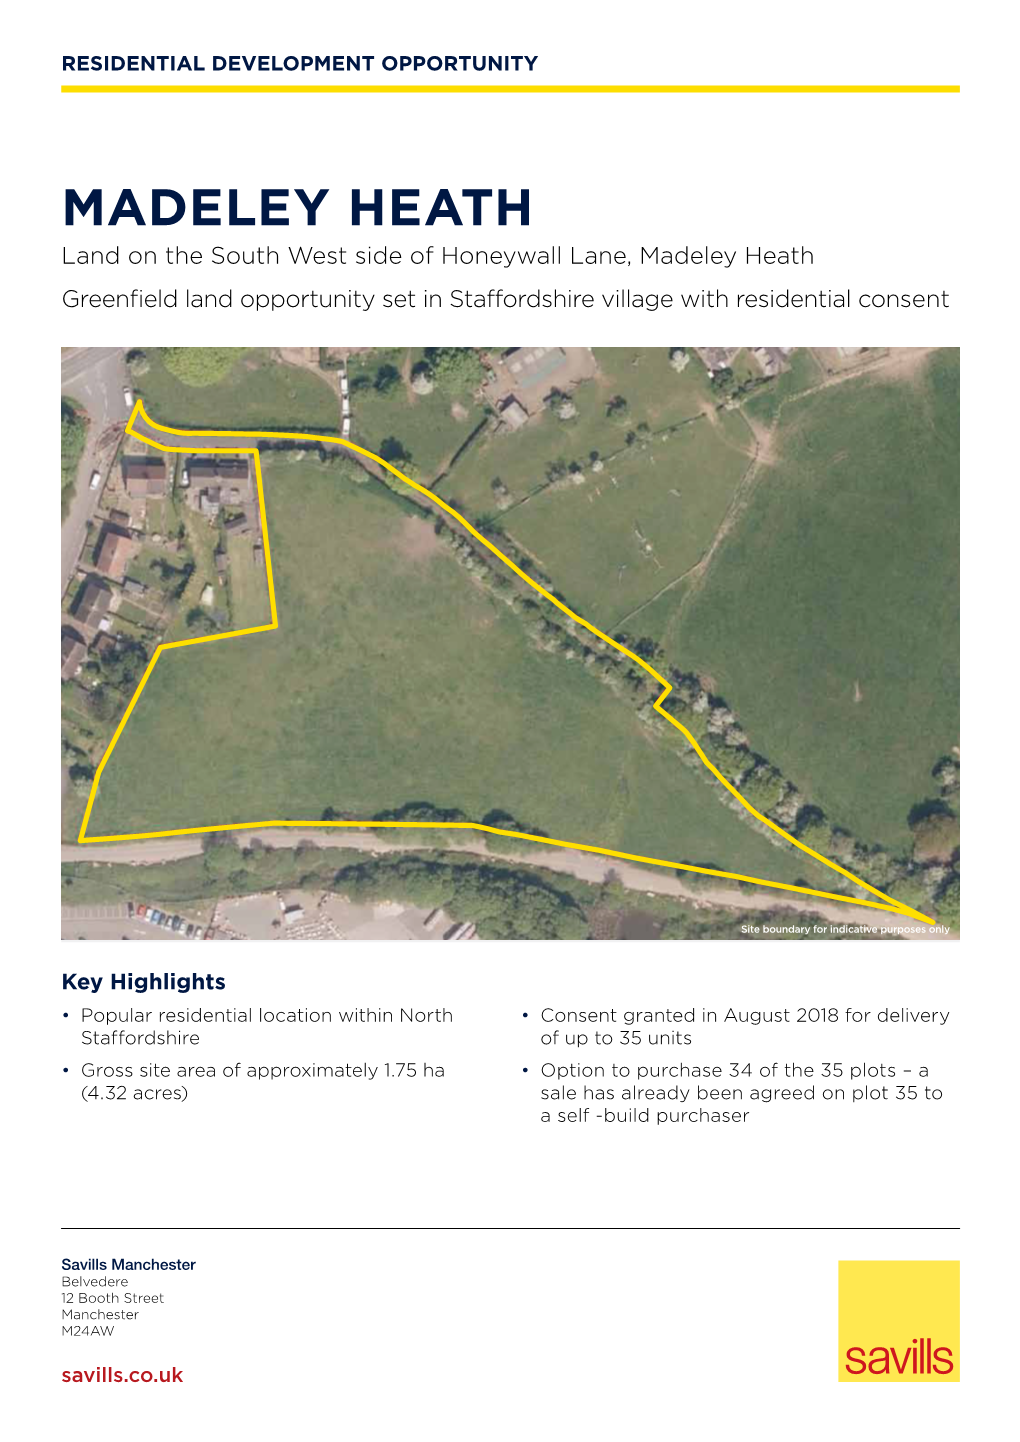 Madeley Heath Land on the South West Side of Honeywall Lane, Madeley Heath Greenfield Land Opportunity Set in Staffordshire Village with Residential Consent